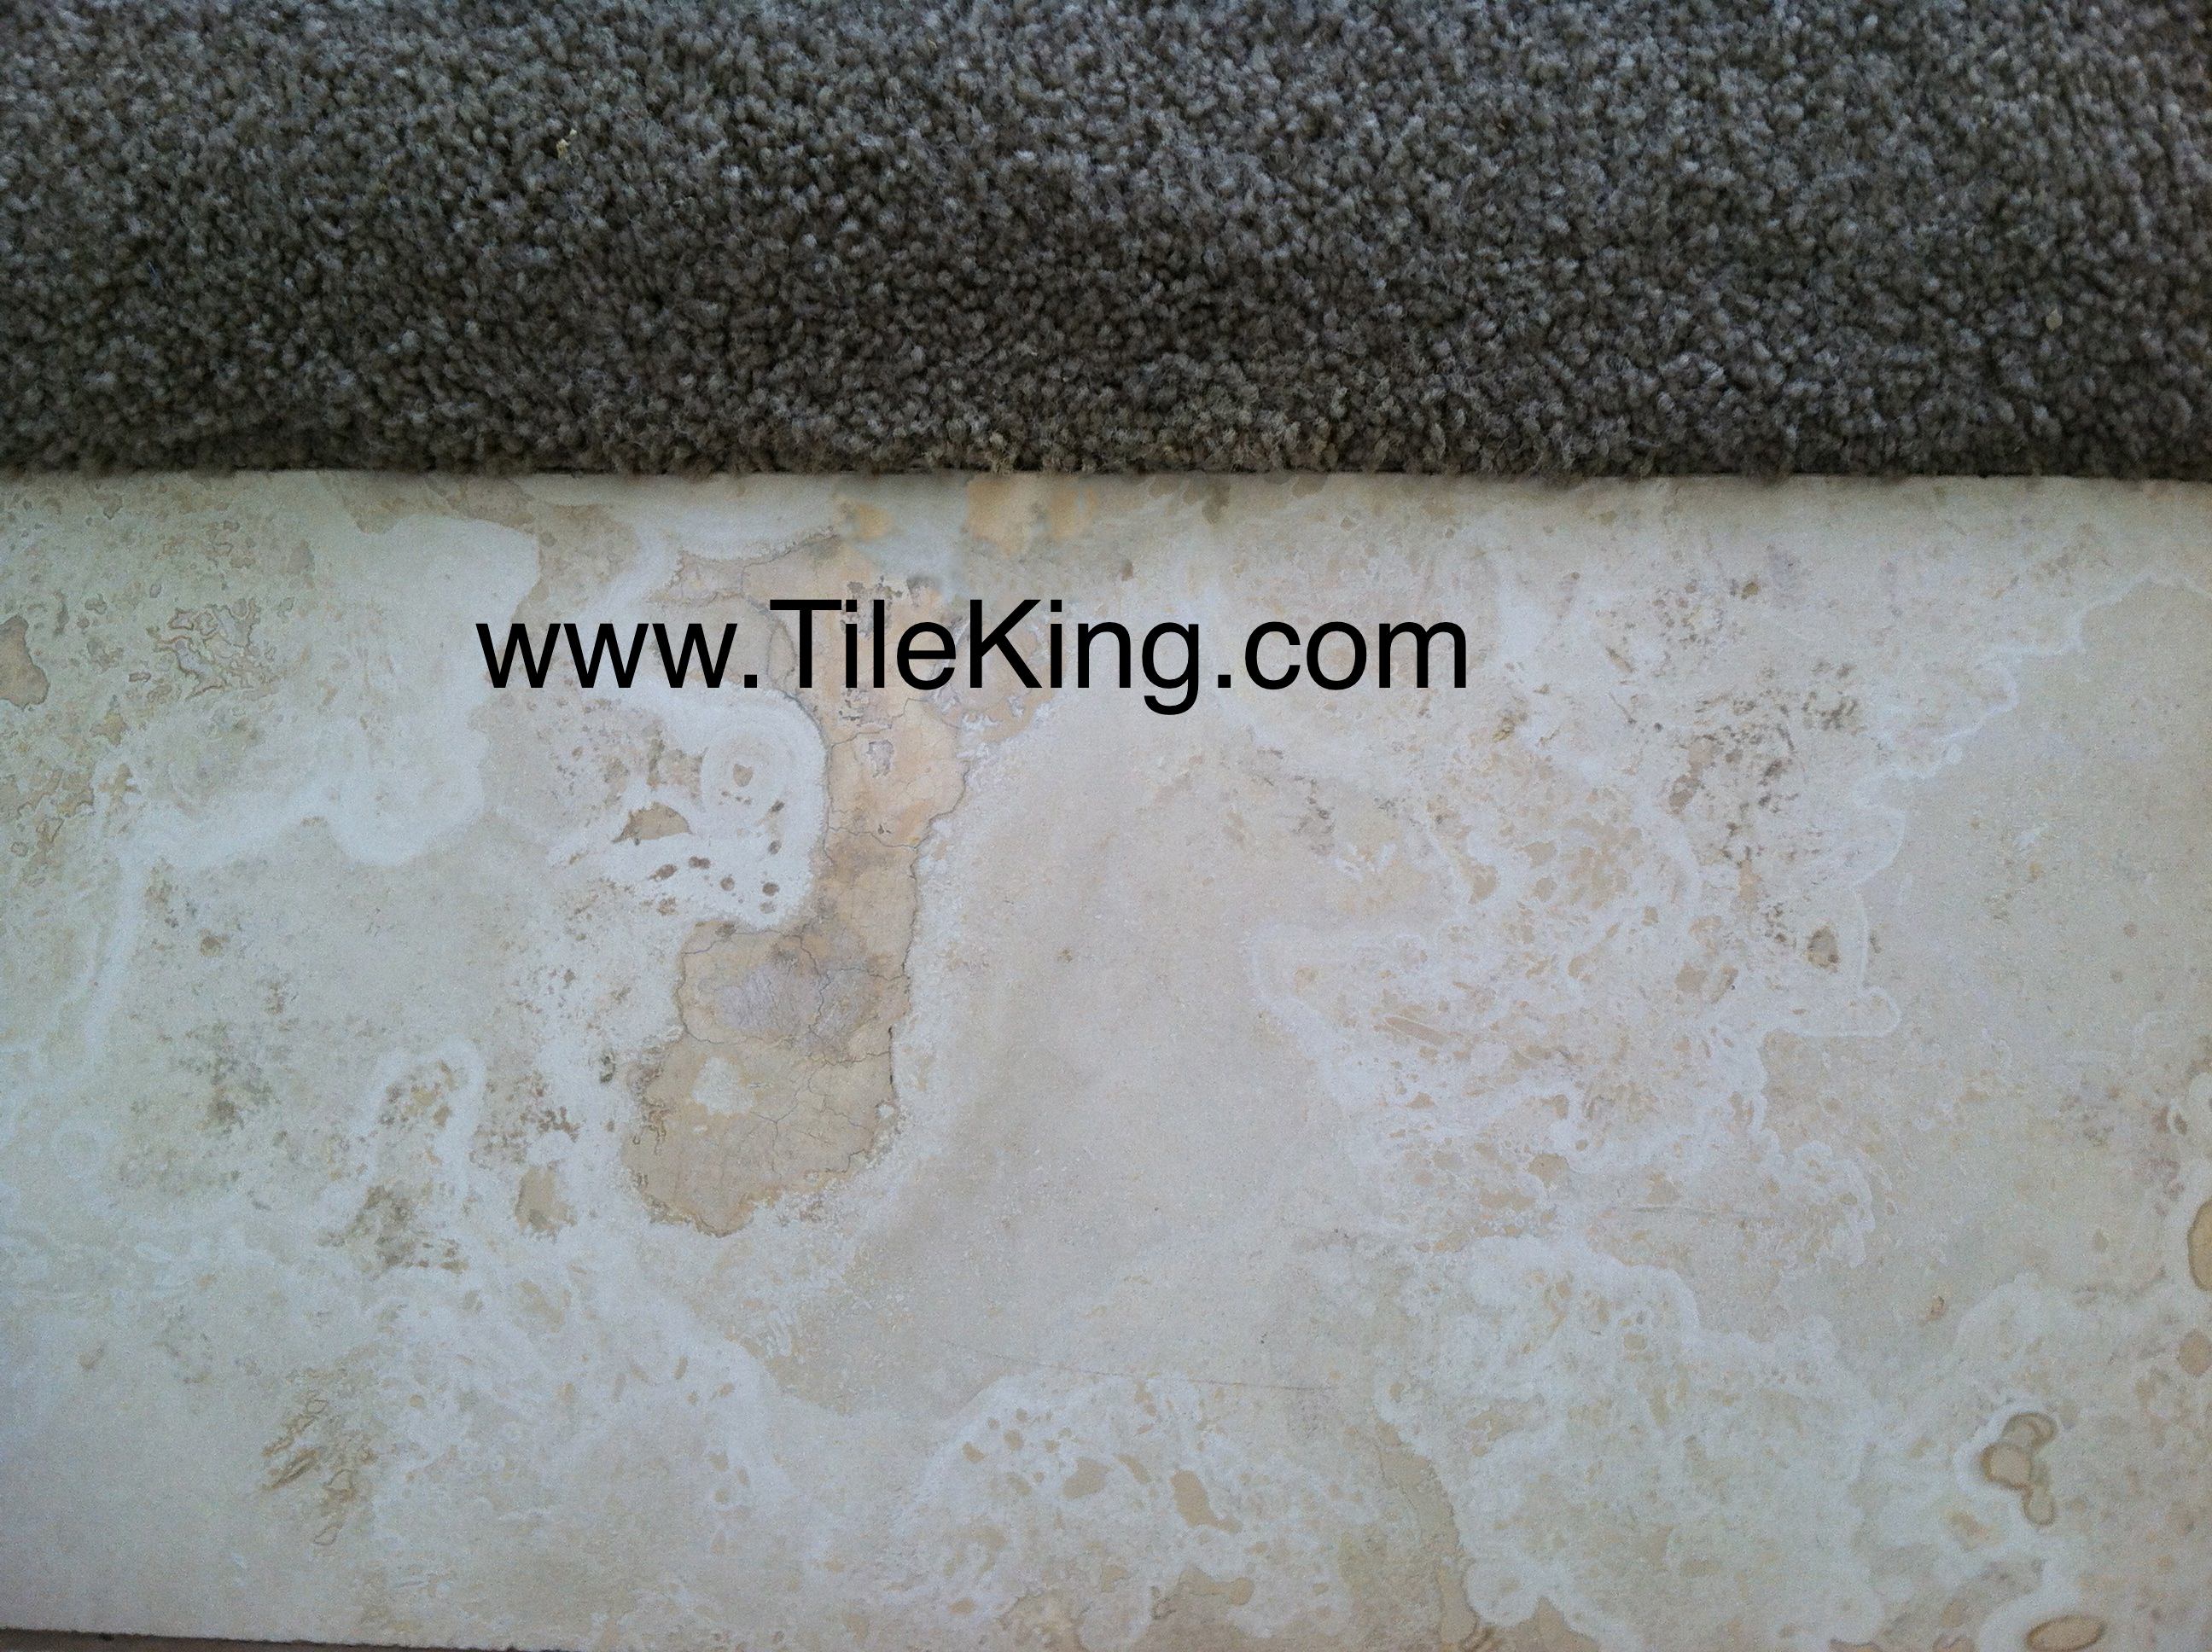 travertine cracked and broken after repairs